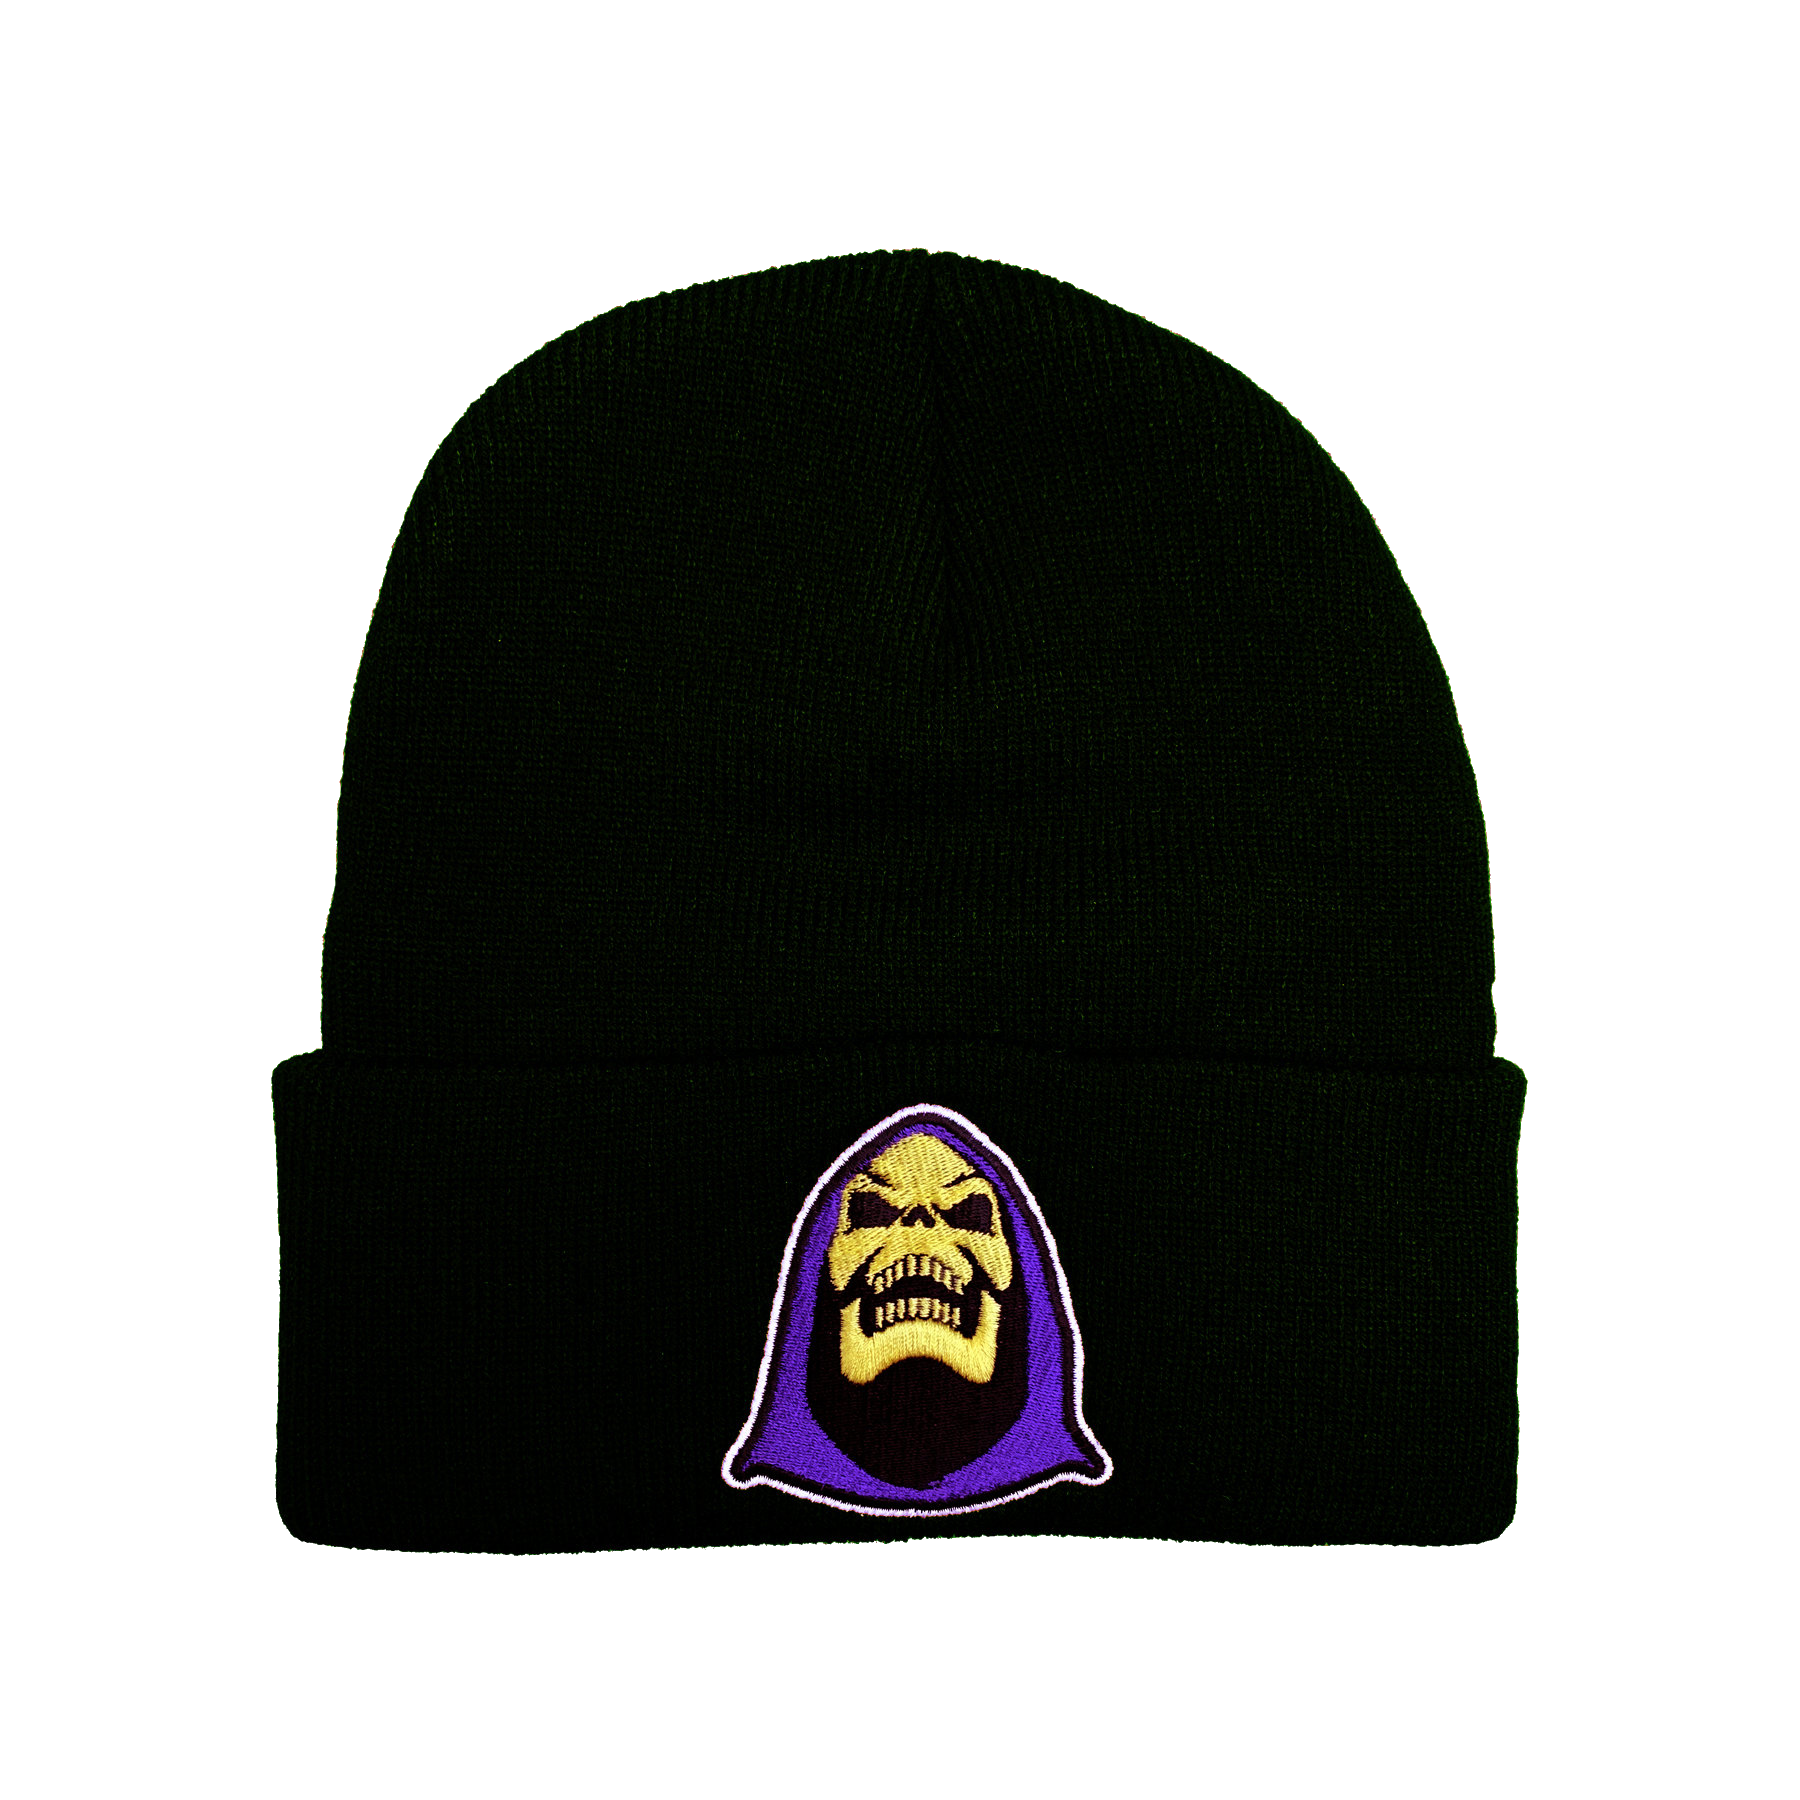 Skeletor Embroidered Beanie - UNMASKED Horror & Punk Patches and Decor